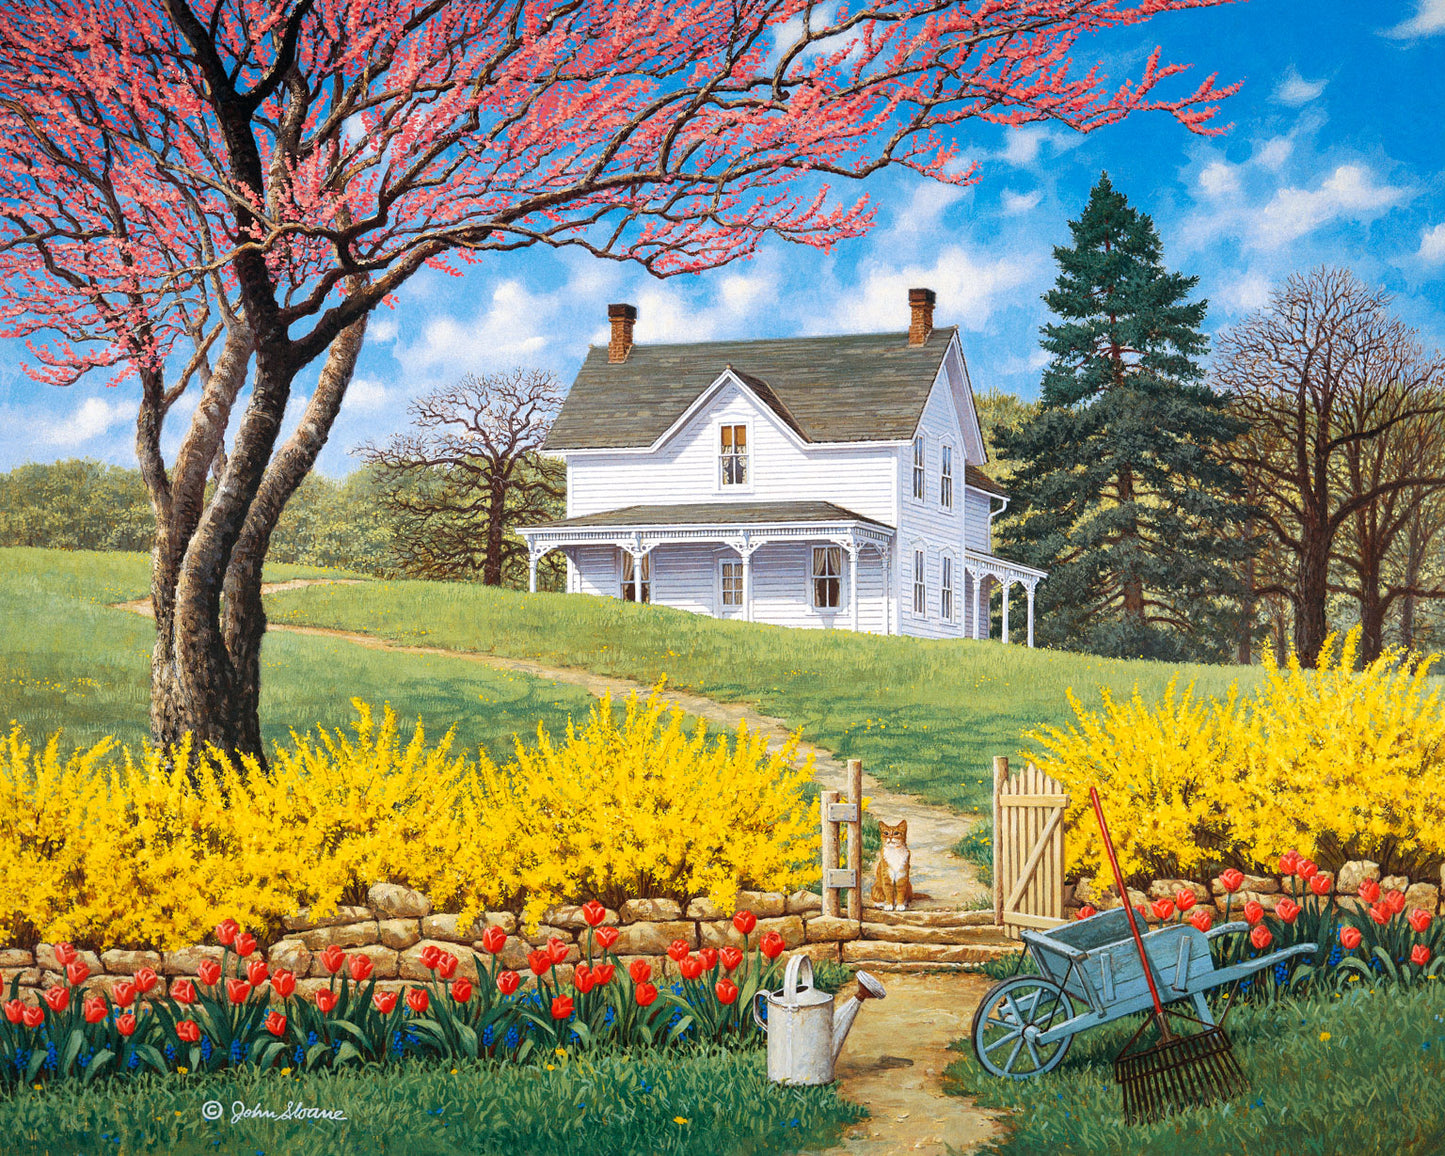 Spring Ahead - Puzzle by John Sloane